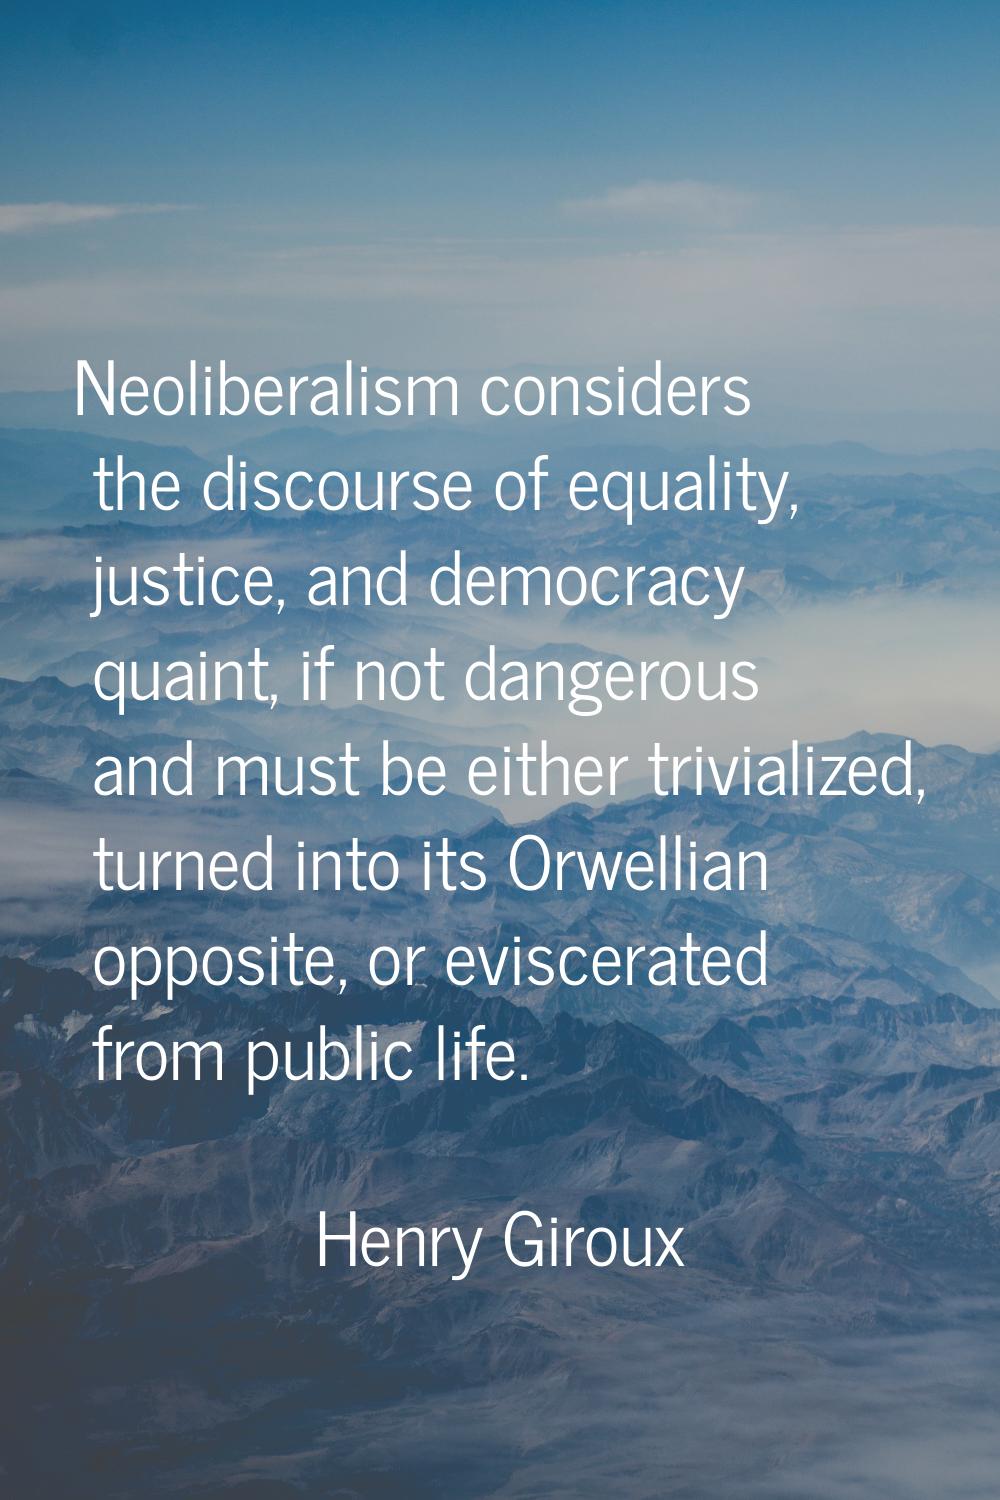 Neoliberalism considers the discourse of equality, justice, and democracy quaint, if not dangerous 